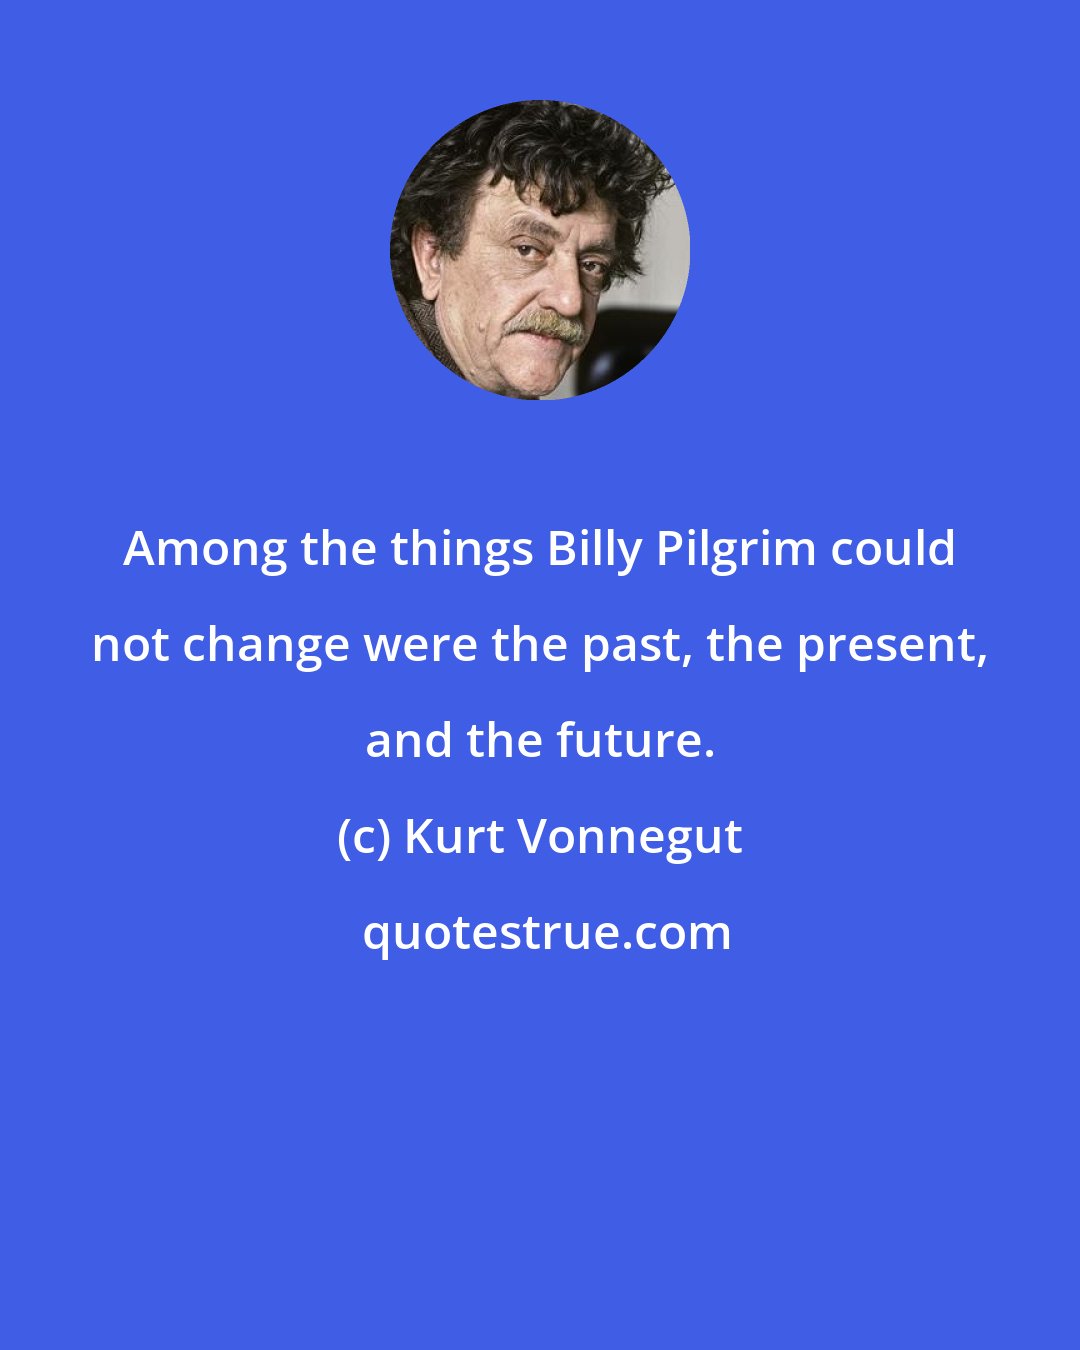 Kurt Vonnegut: Among the things Billy Pilgrim could not change were the past, the present, and the future.